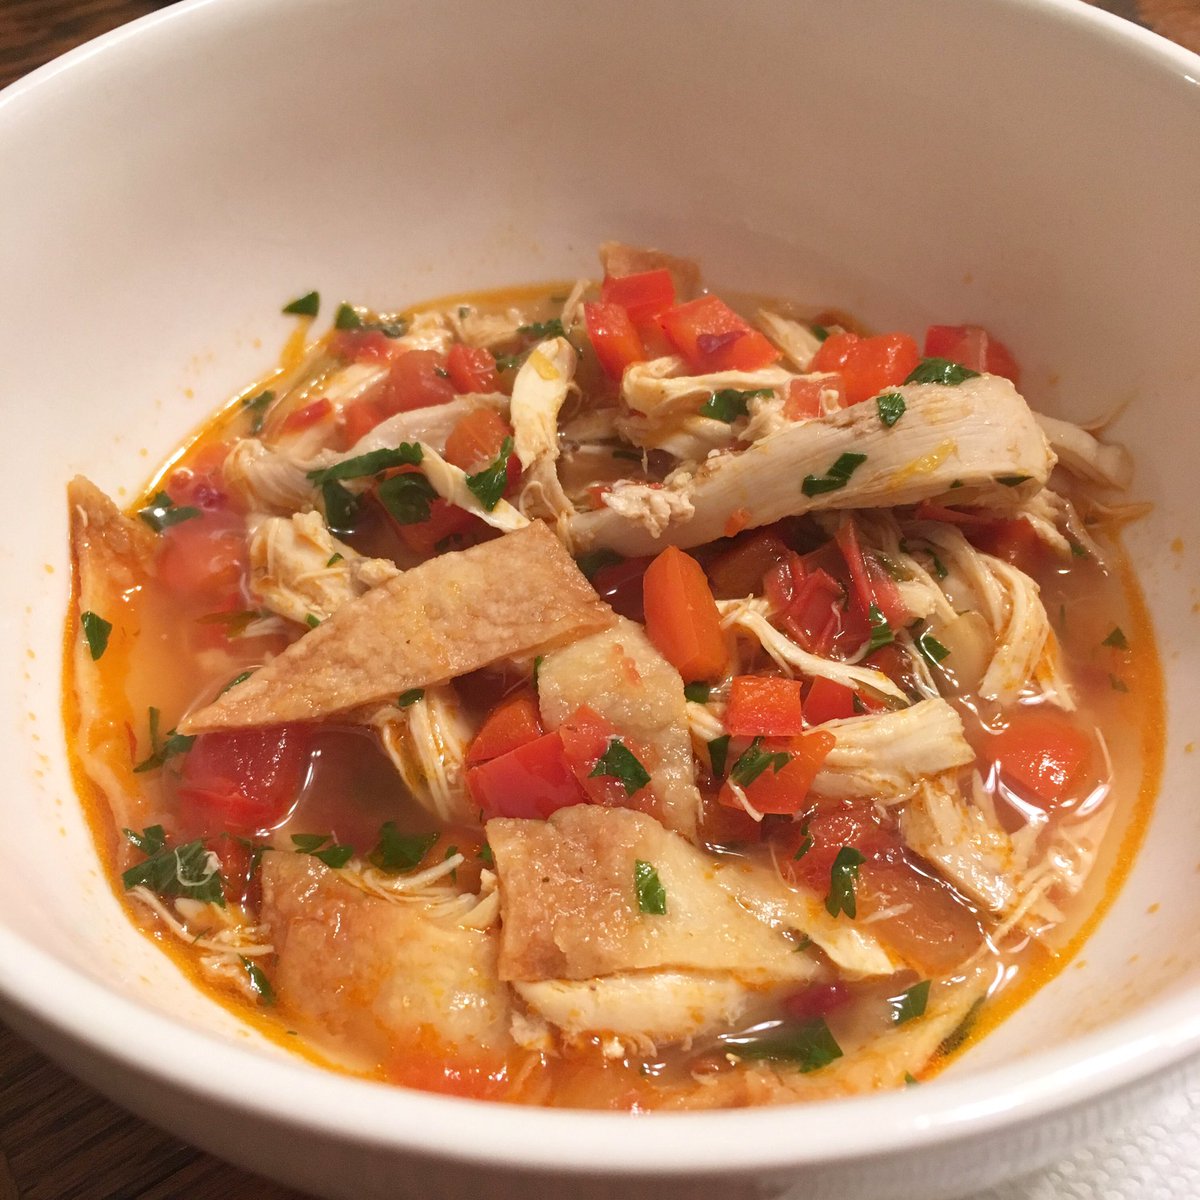 It’s cold outside tonight so we whipped up this fast and easy Chipotle Chicken Tortilla Soup for dinner. So yummy. 

#chickentortillasoup #soup #chickensoup #chipotlechicken #chipotle #chicken #coldweatherfood #quickmeals #easymeals #quickandeasydinner #dinner